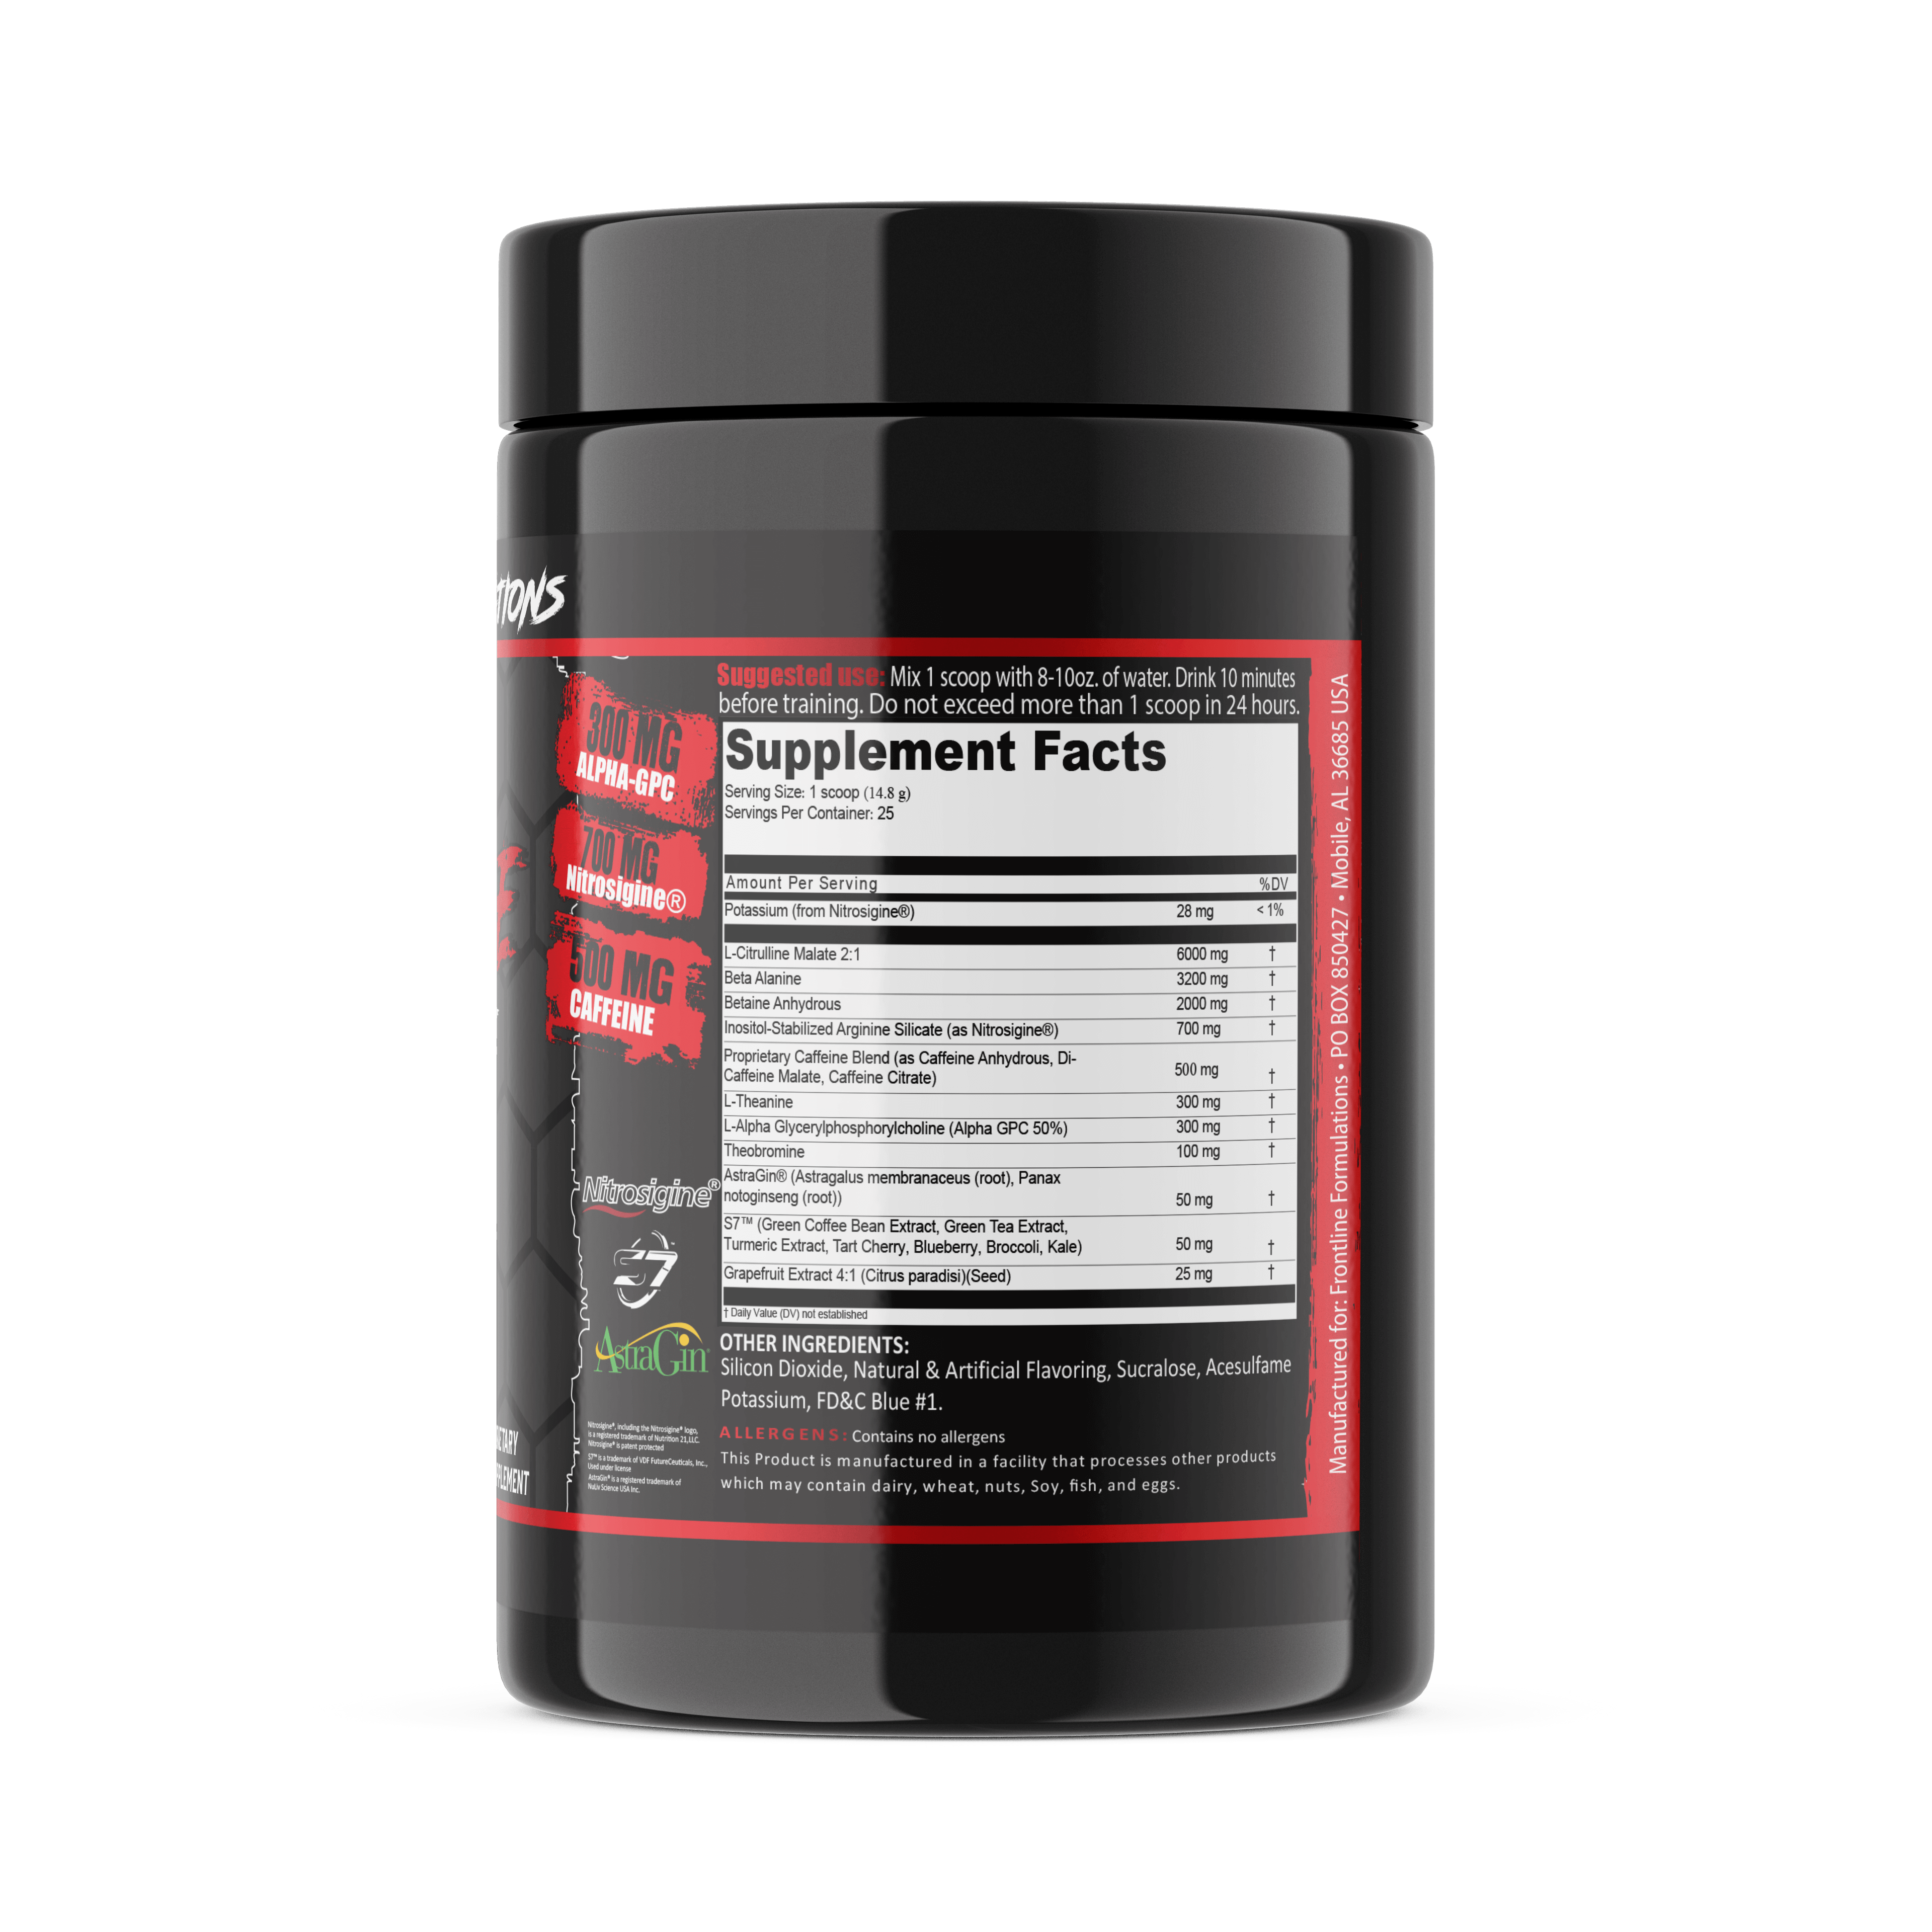 Crucible Extreme Pre-Workout Crucible is quickly becoming the HOTTEST pre-workout on the market because of its clinically dosed ingredients and perfected formula. Insane energy from 500mg of potent time-released, tri-blend caffeine Enhances nitric oxide p